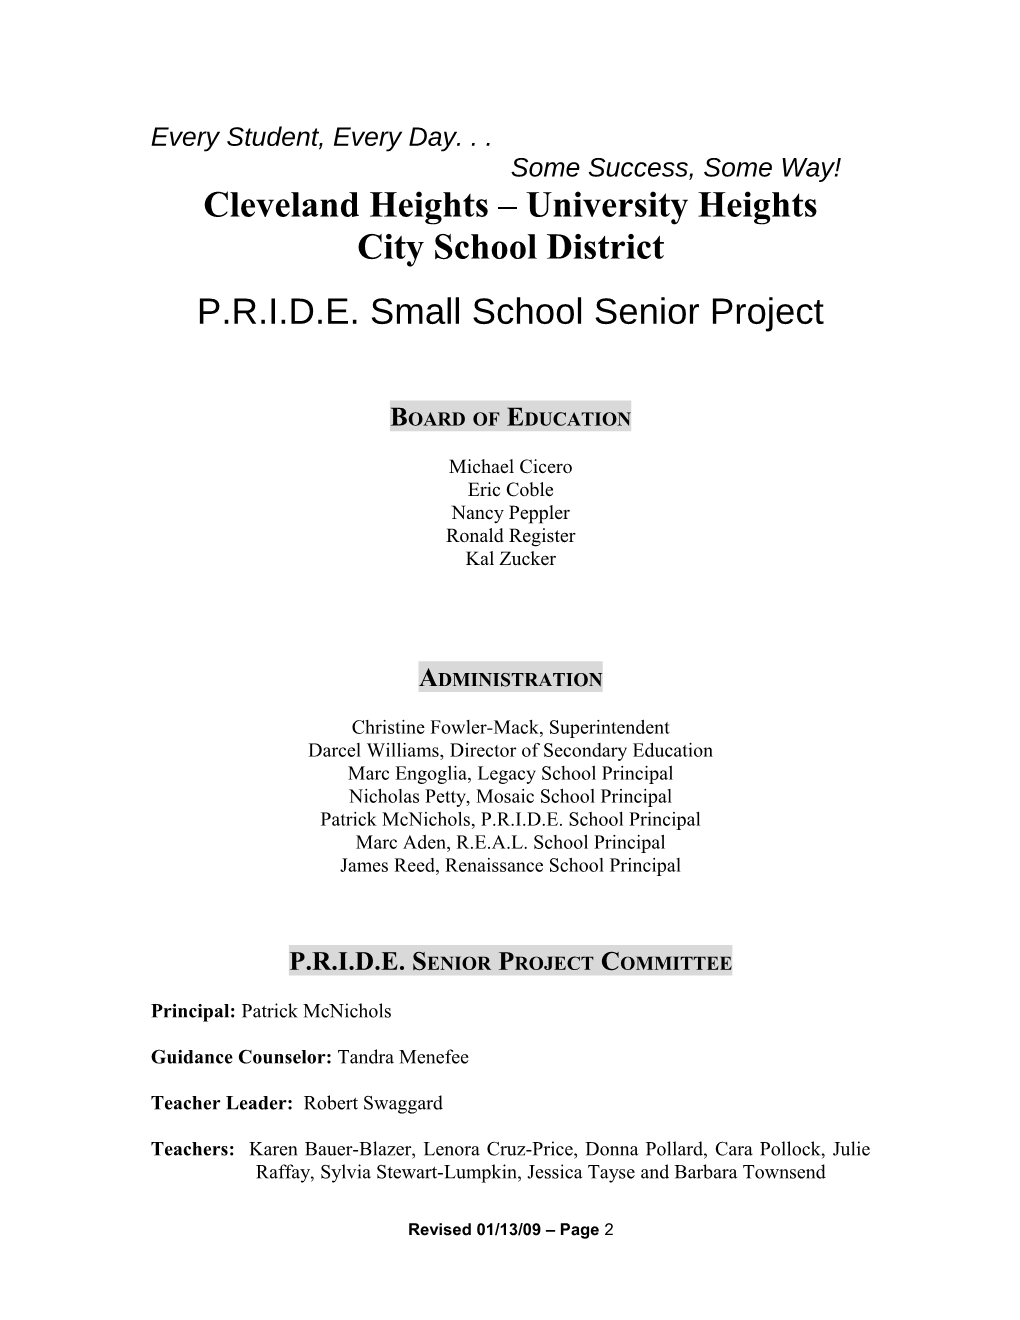 The Cleveland Heights School Senior Project Gives Members of the Senior Class an Opportunity